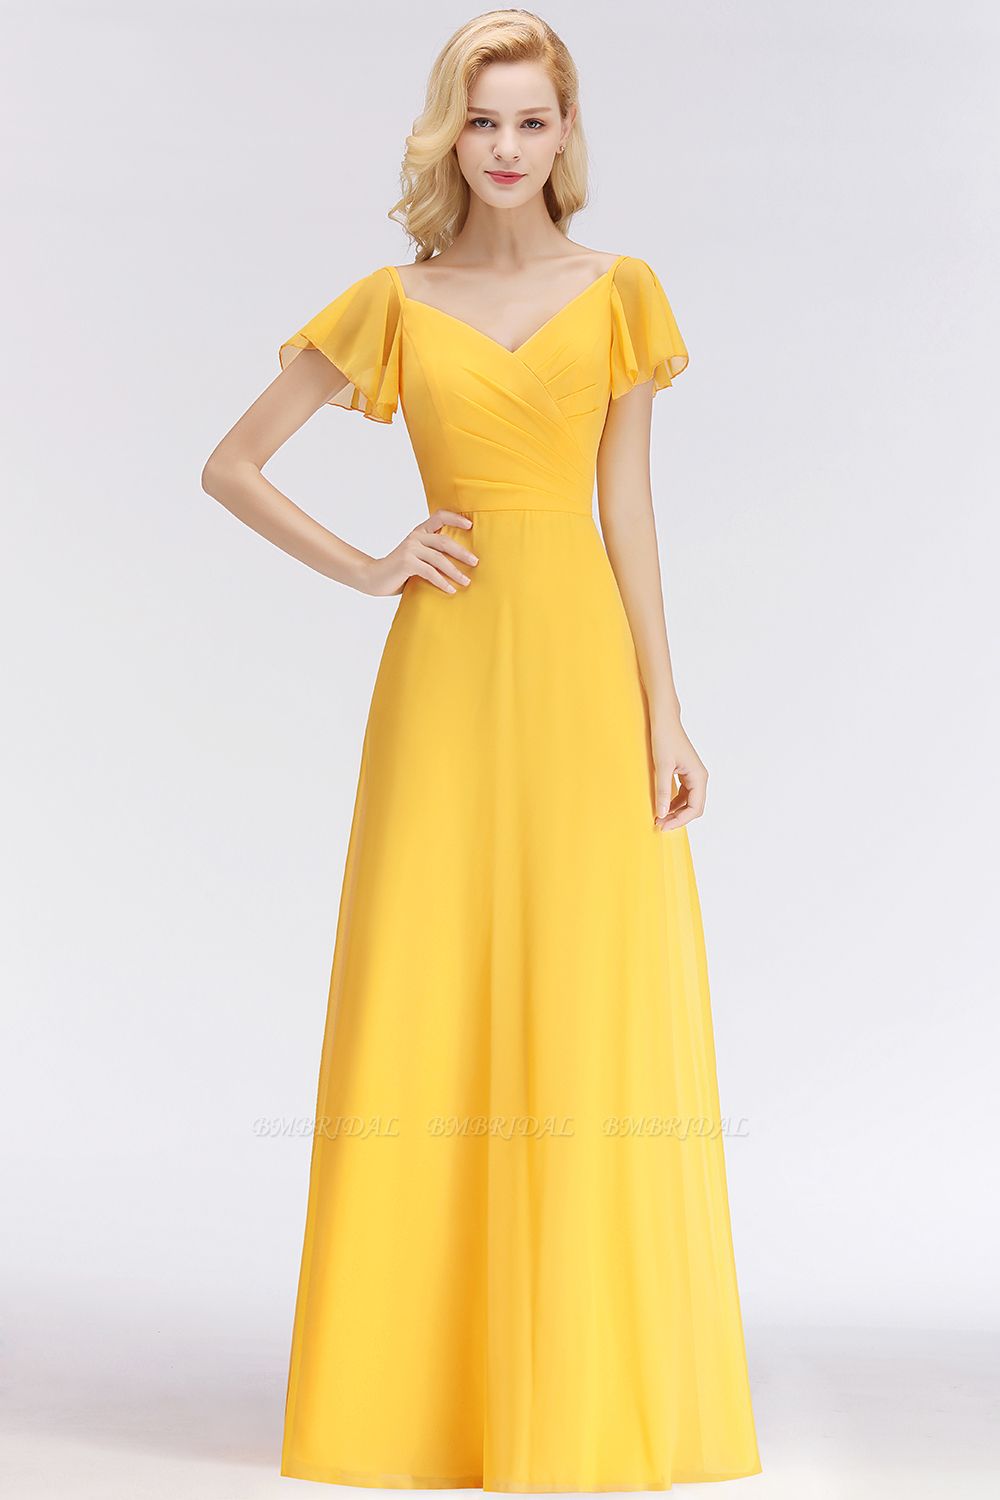 BMbridal Offering A Great Deal Of Affordable Bridesmaid Dresses Of High Quality